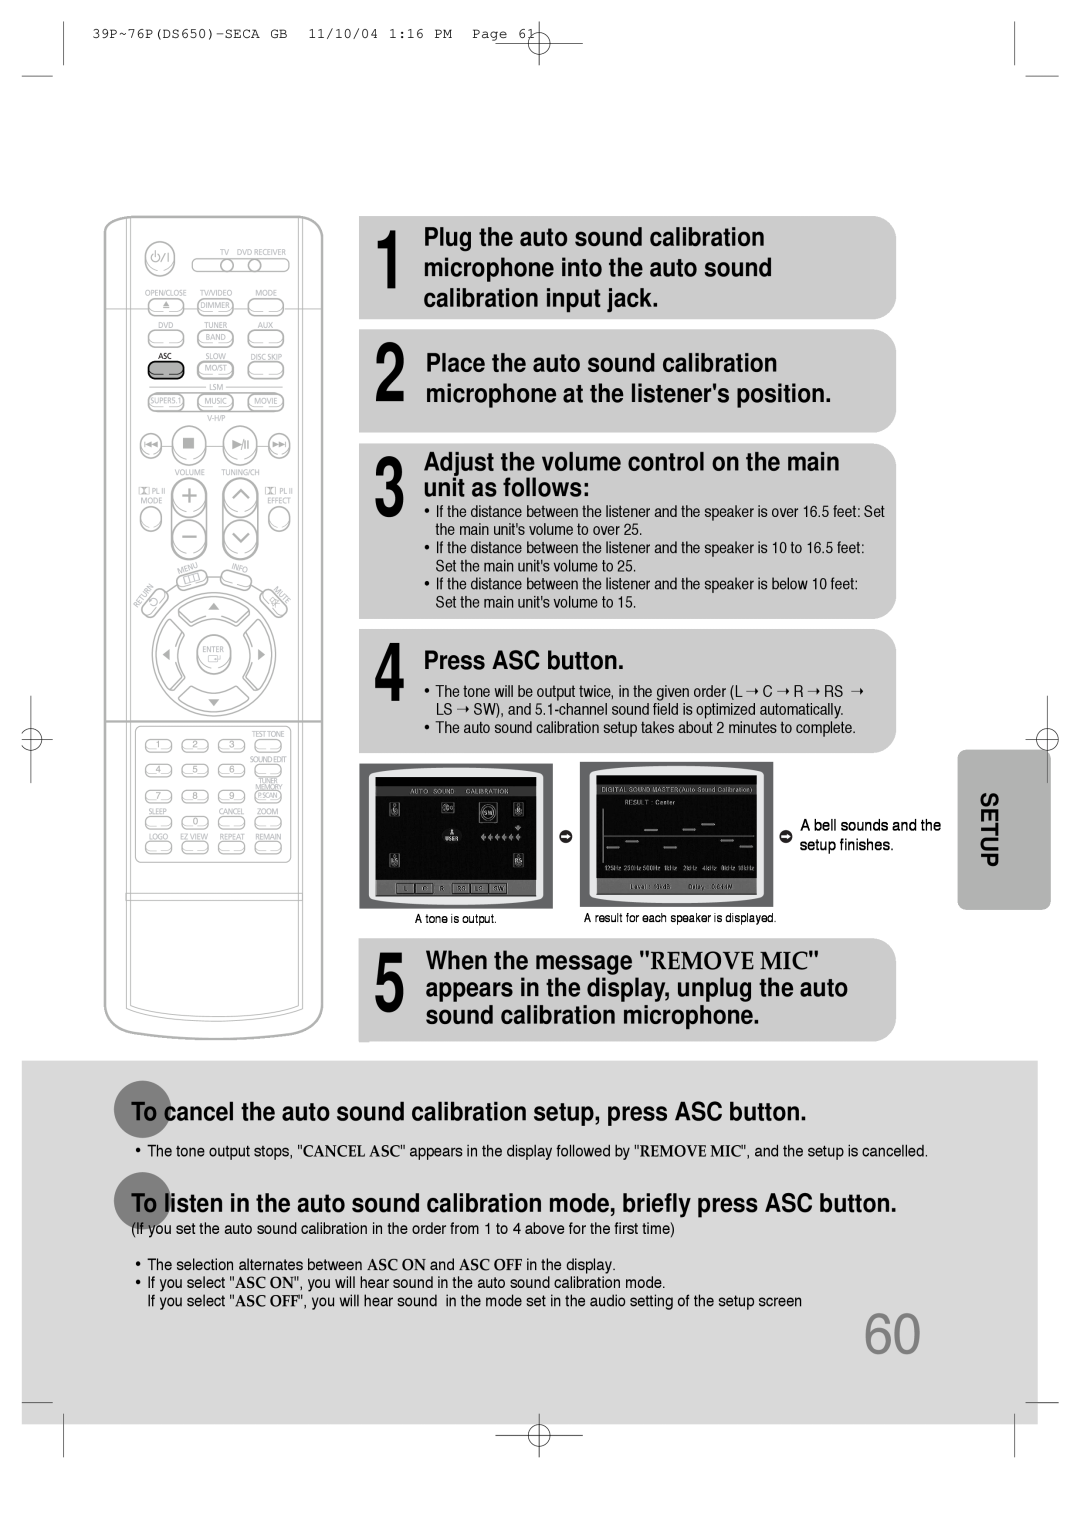 Samsung HT-DS650 instruction manual Adjust the volume control on the main, unit as follows, Press ASC button 